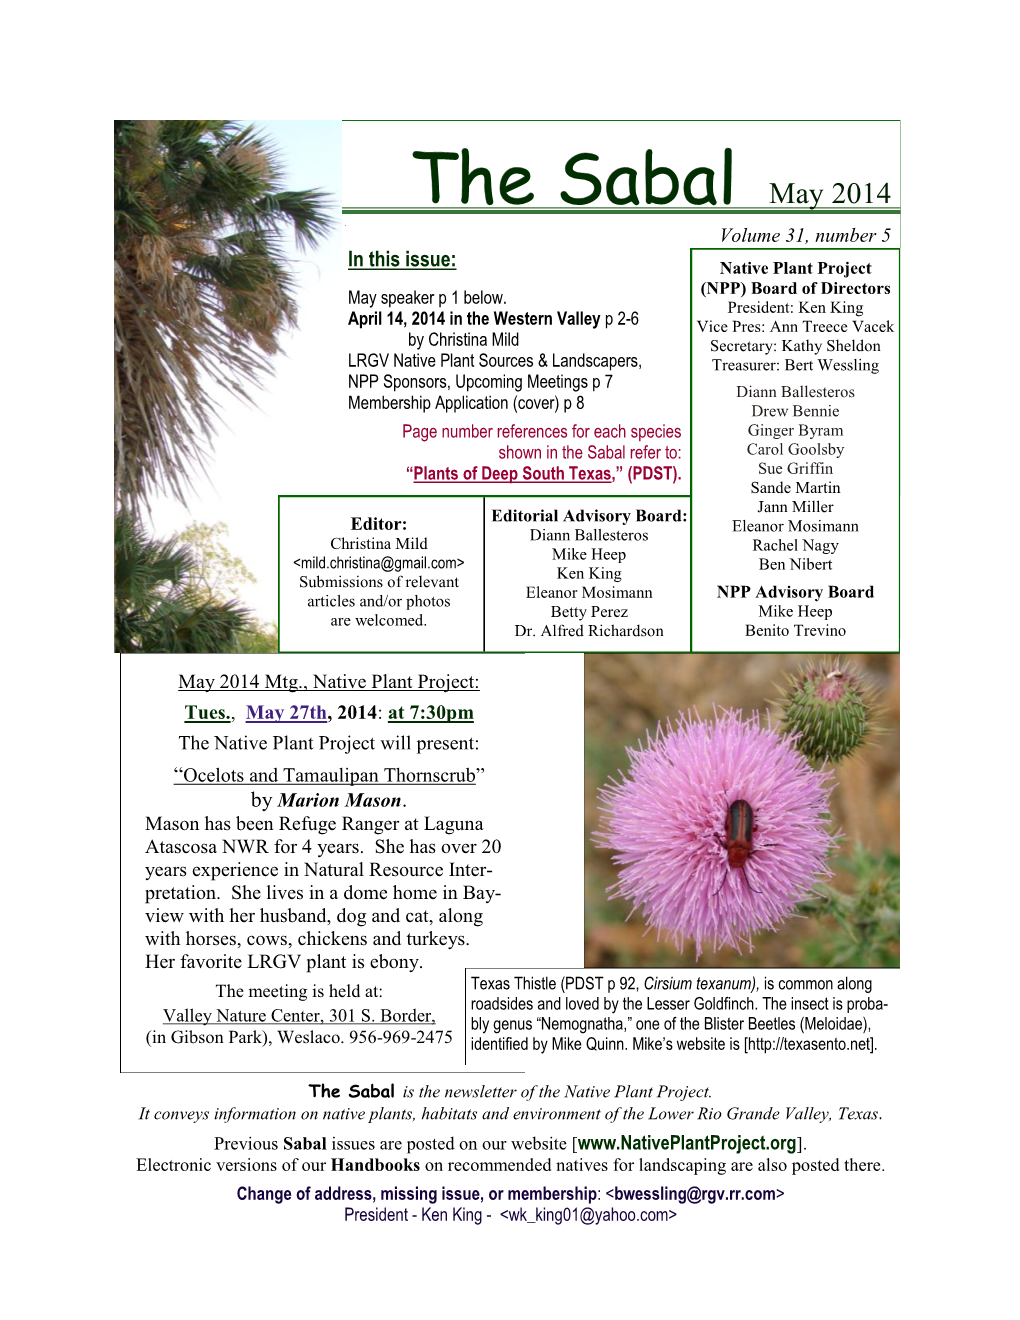 The Sabal May 2014 Volume 31, Number 5